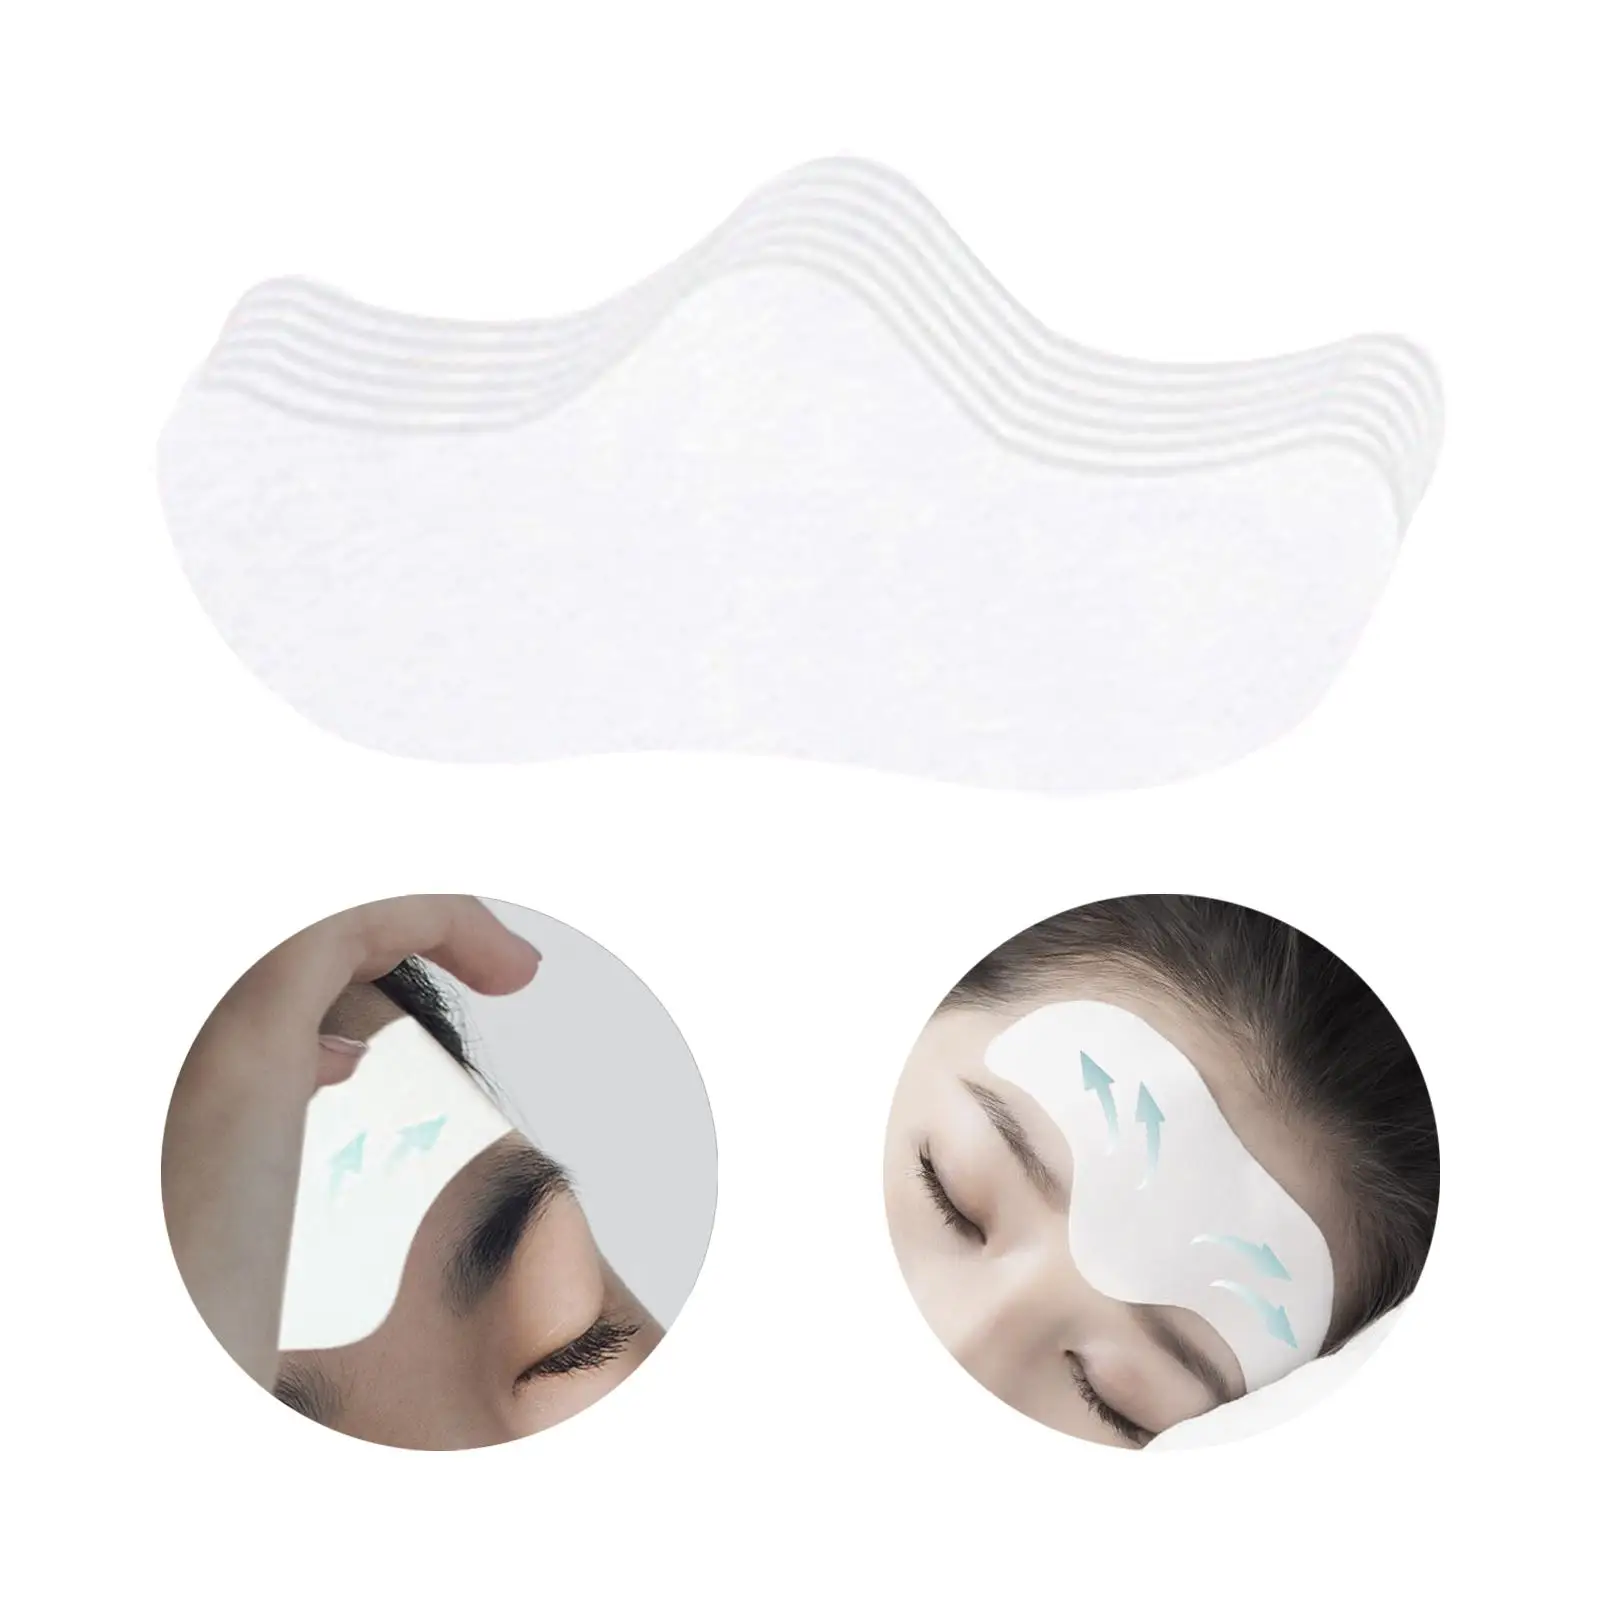 6Pcs Forehead Wrinkle Resistant Patches Face Smoothing Patches for Men Women Forehead Wrinkle Resistant Skin Care Tapes Mask